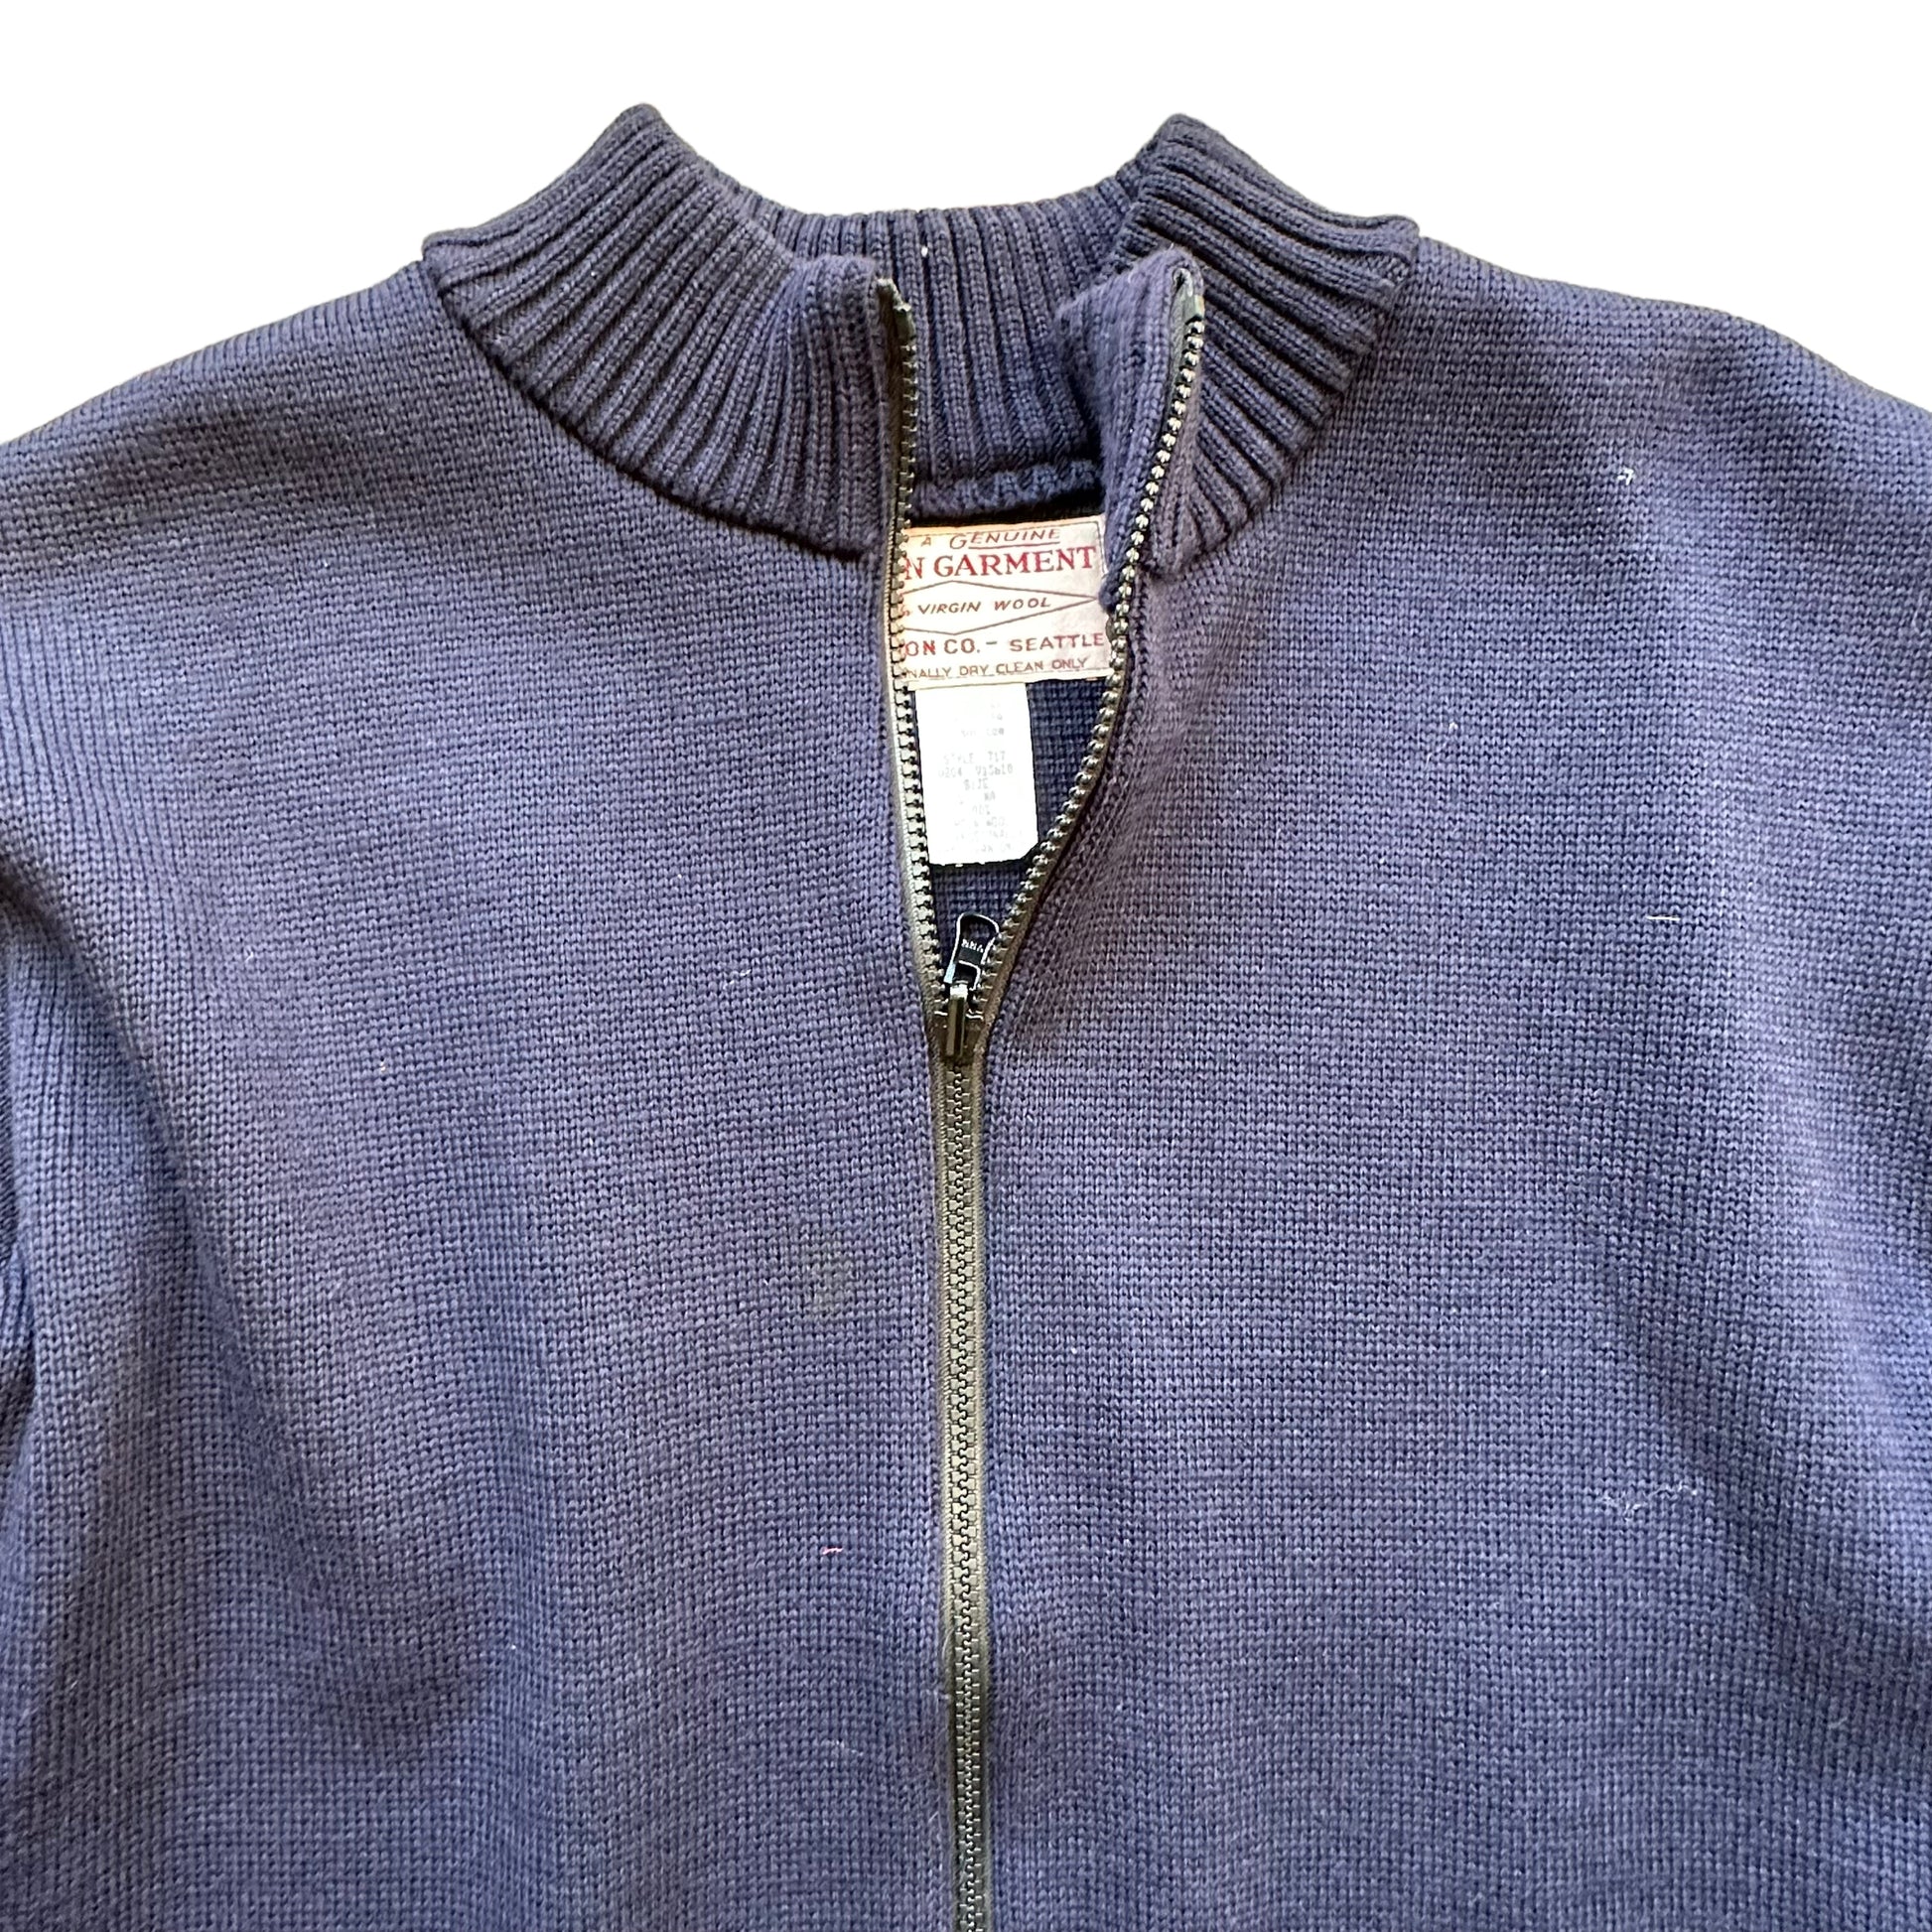 Upper Front View of Filson Style 717 Navy Blue Zip Up Cardigan SZ L |  Barn Owl Vintage Goods | Vintage Workwear Seattle